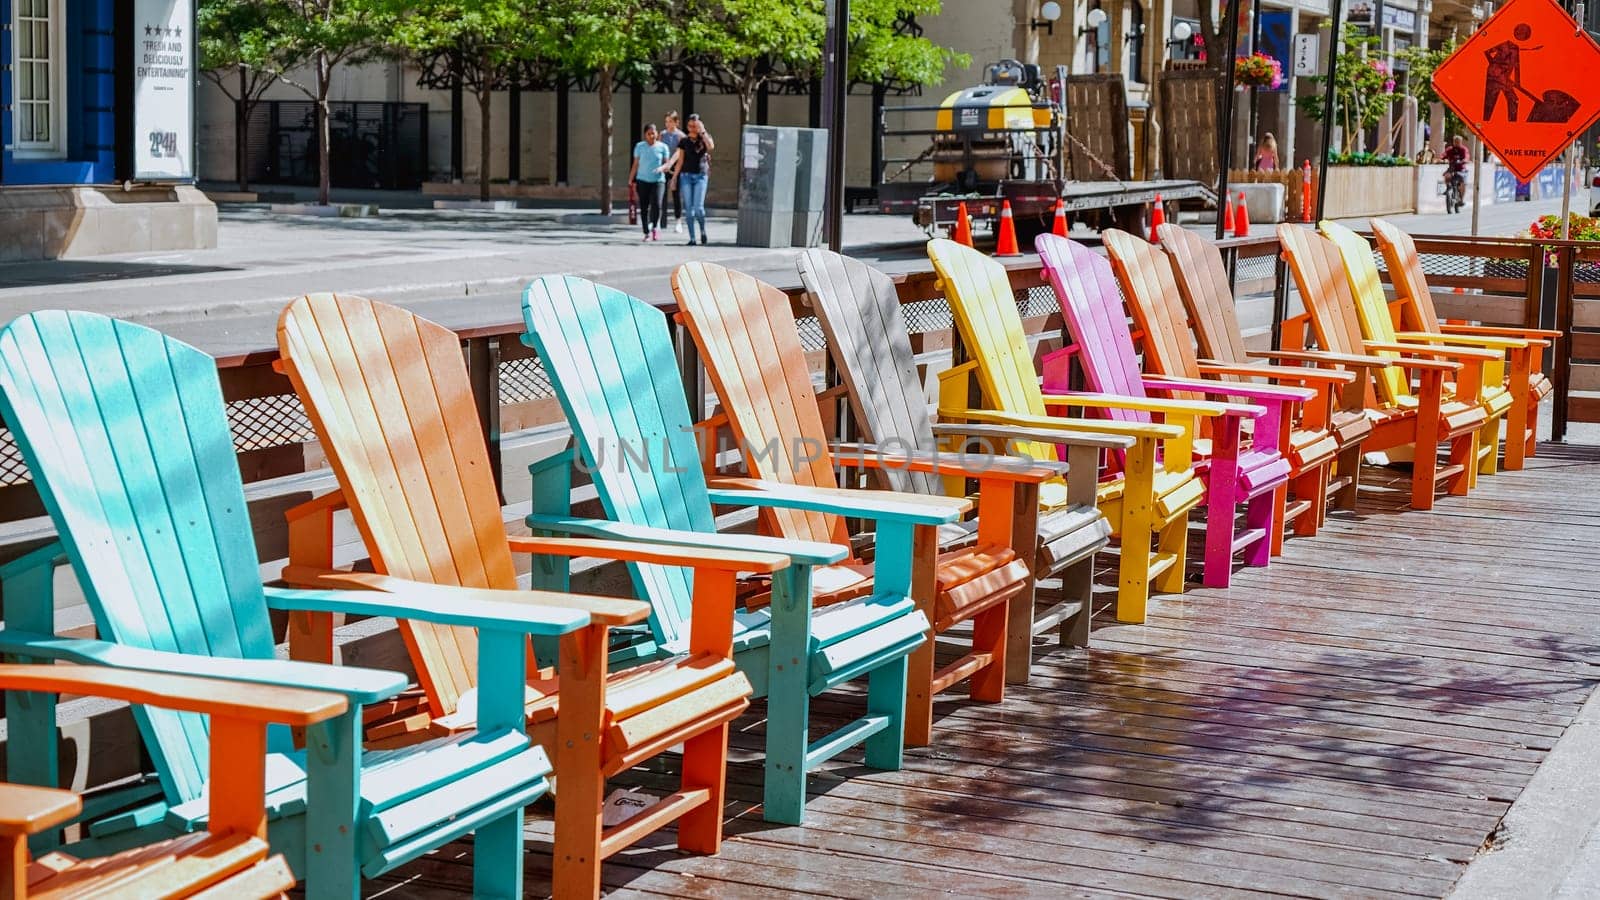 Colorful chairs on King street in front of International Film Festival building. Toronto, Canada - July 4, 2022 by JuliaDorian